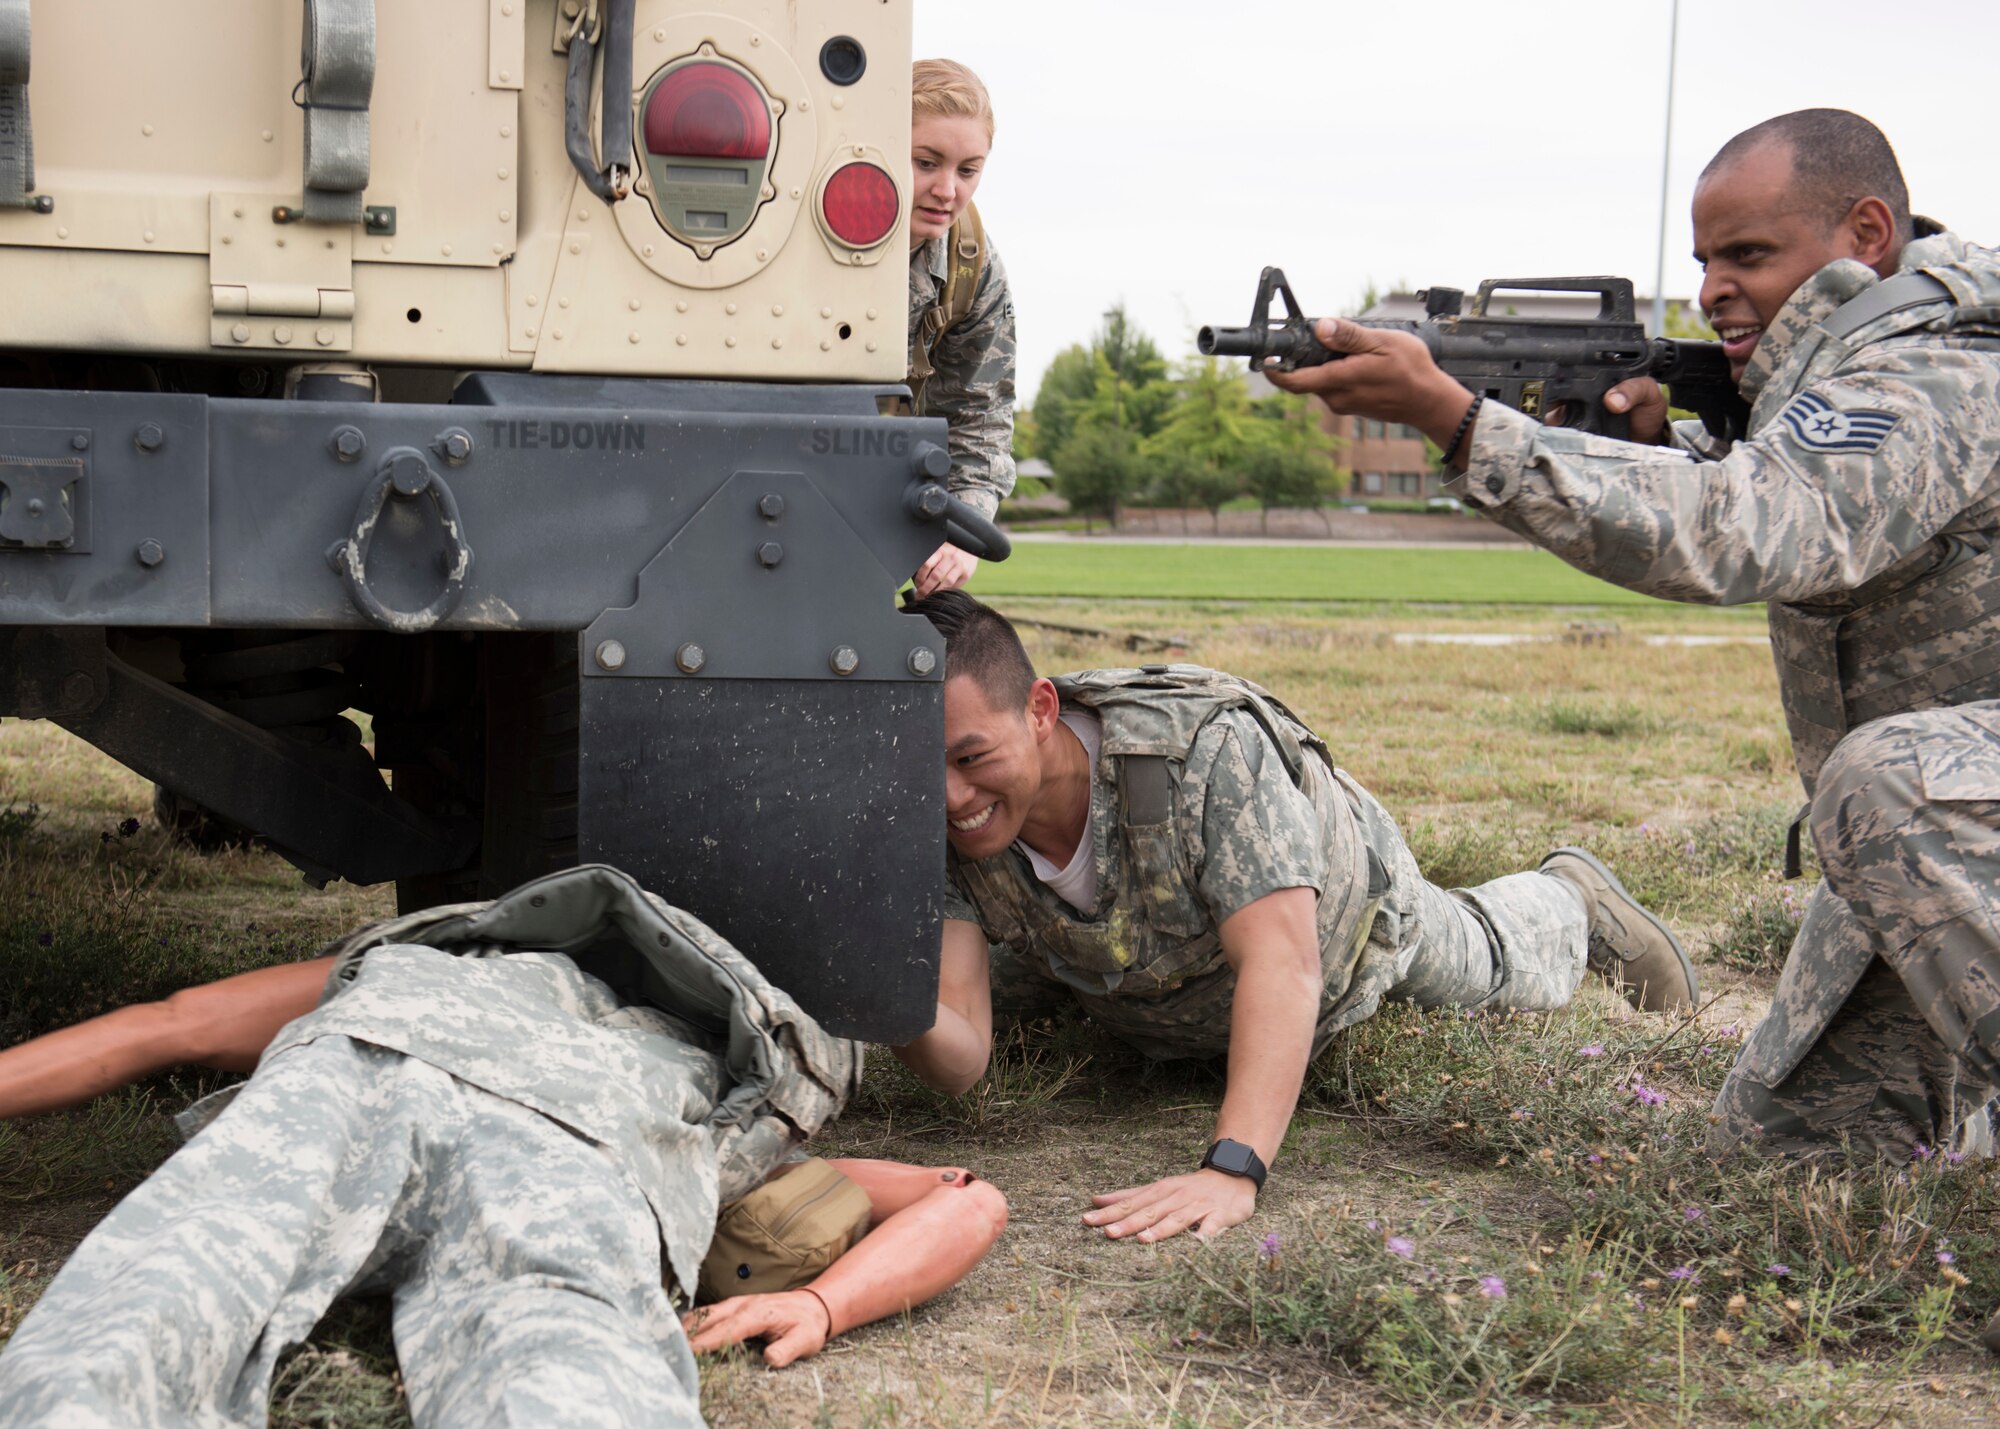 U.S. Air Force students provide cover while pulling a ‘wounded’ training mannequin out of simulated line-of-fire during the Tactical Combat Casualty Care course at Fairchild Air Force Base, Washington, Sept. 12, 2019. Battlefield simulation drills are vital to provide medics and combat personnel with realistic situations where they provide life-saving care and evacuation of wounded. (U.S. Air Force photo by Senior Airman Ryan Lackey)